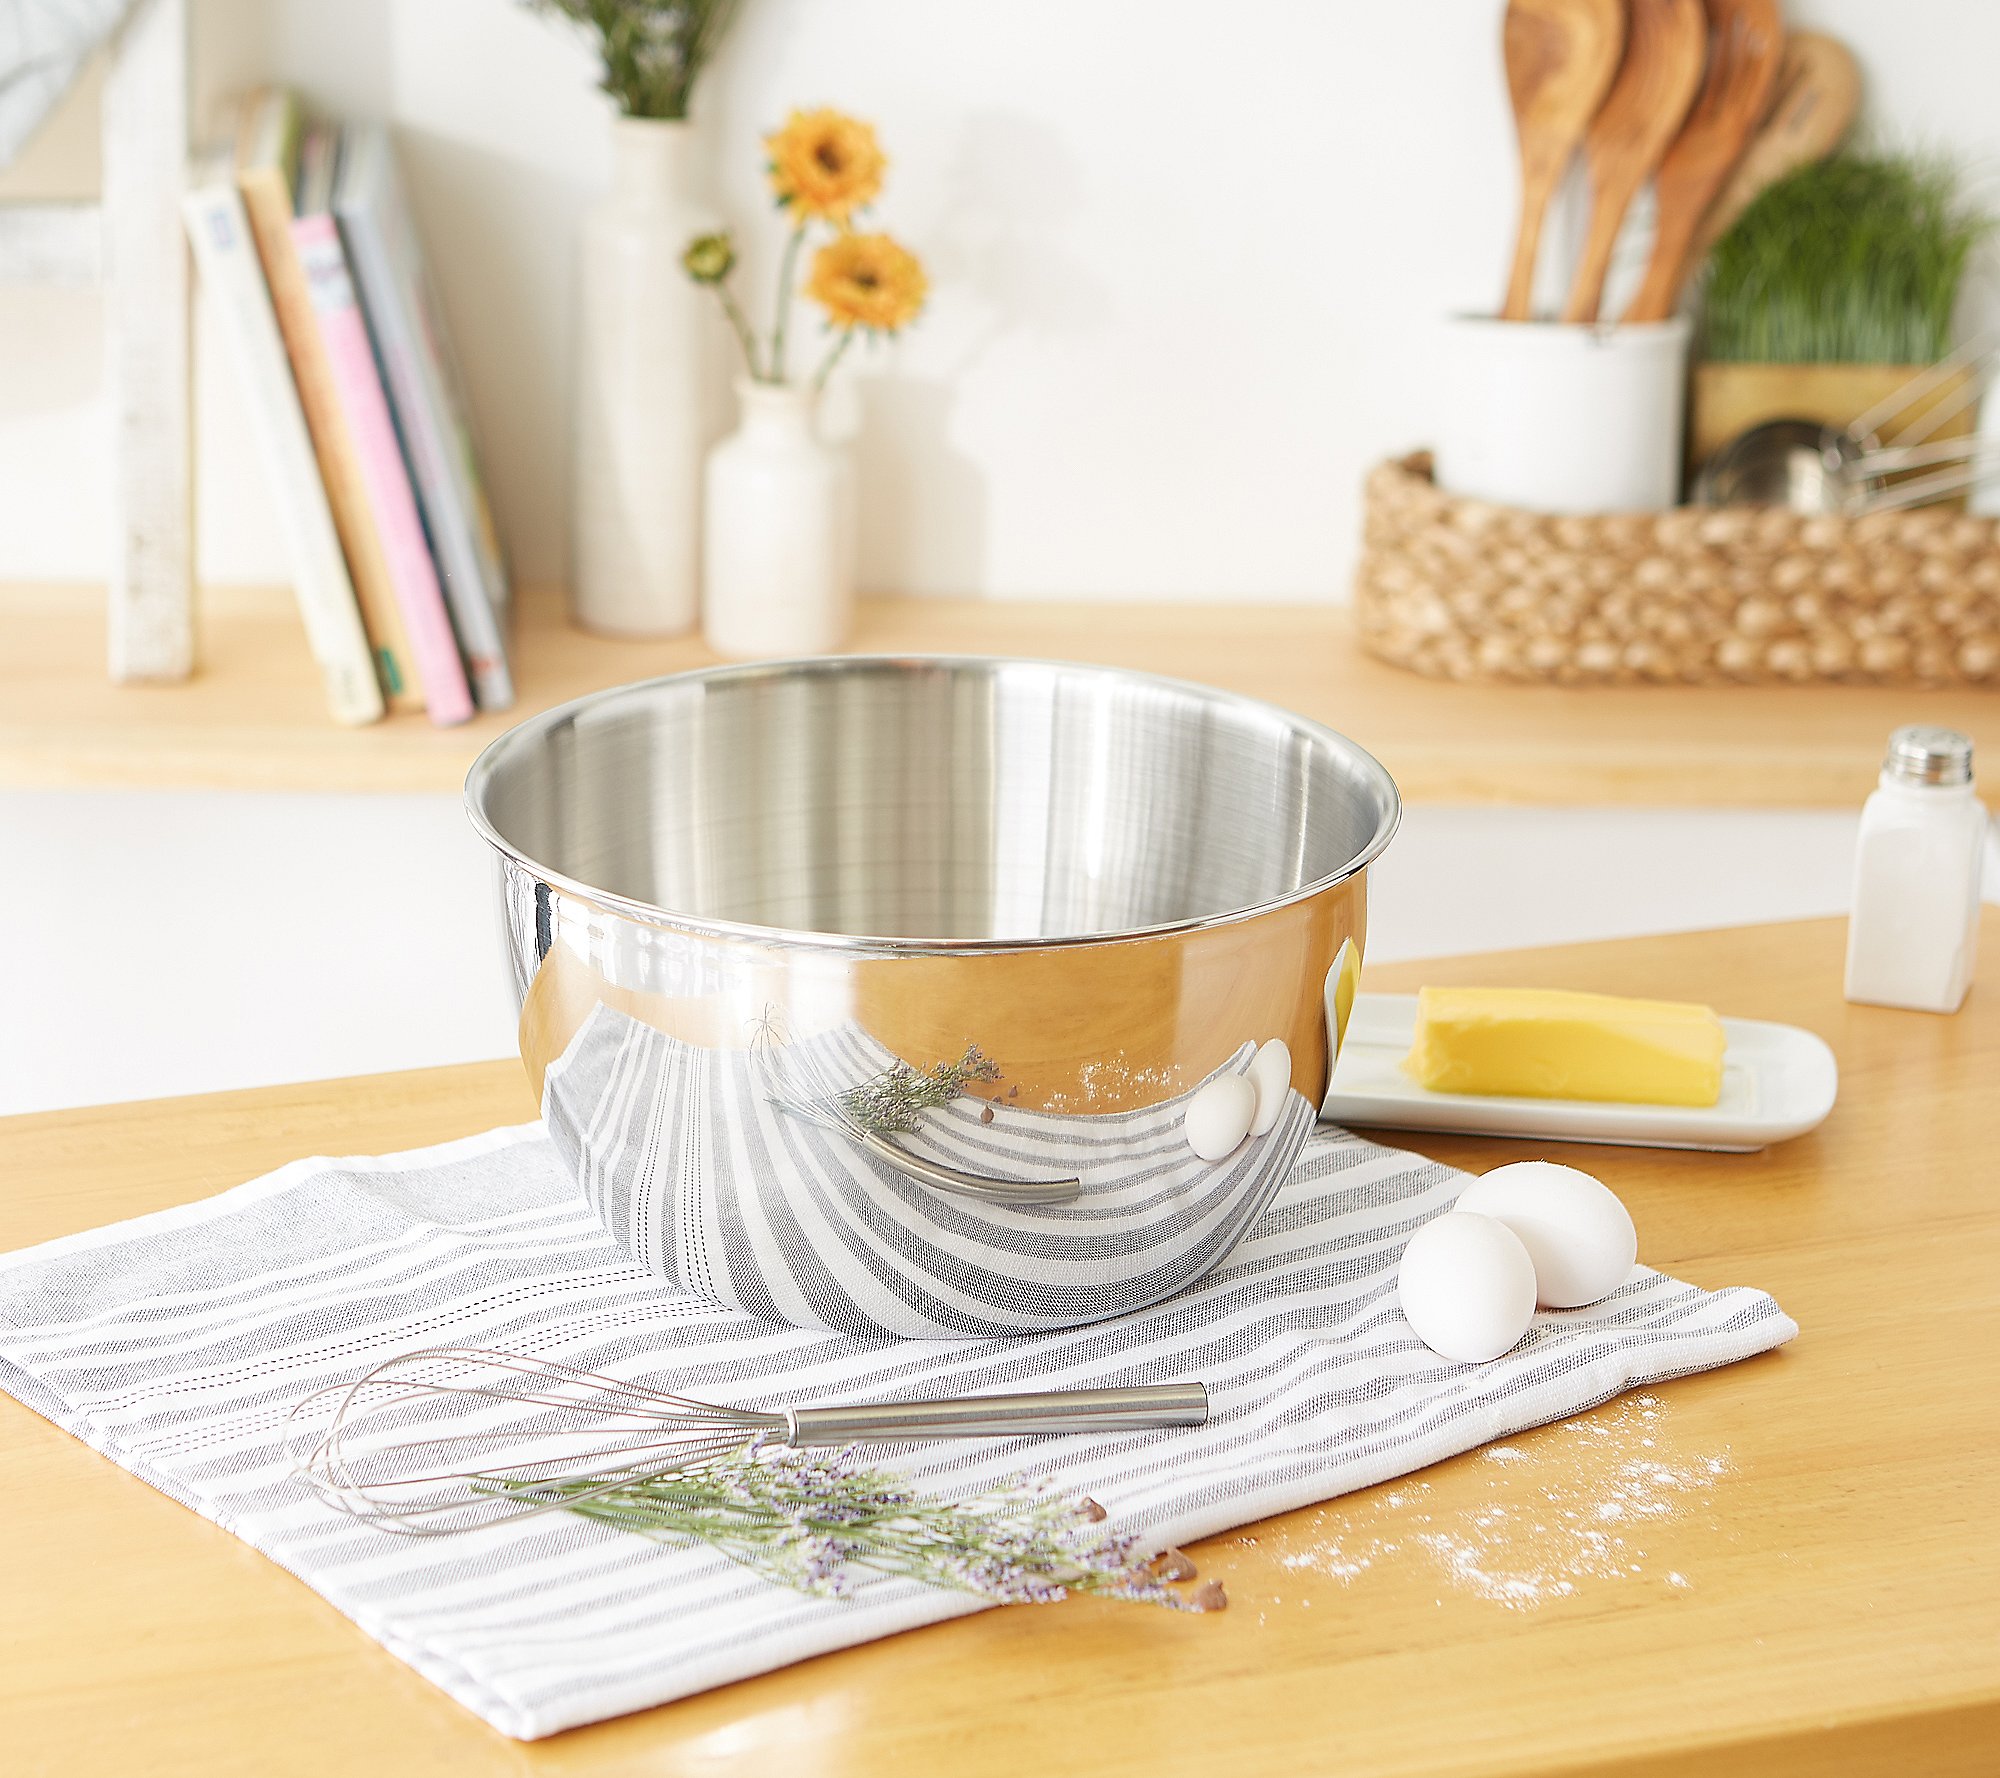 RSVP 8 Qt. Stainless Steel Mixing Bowl